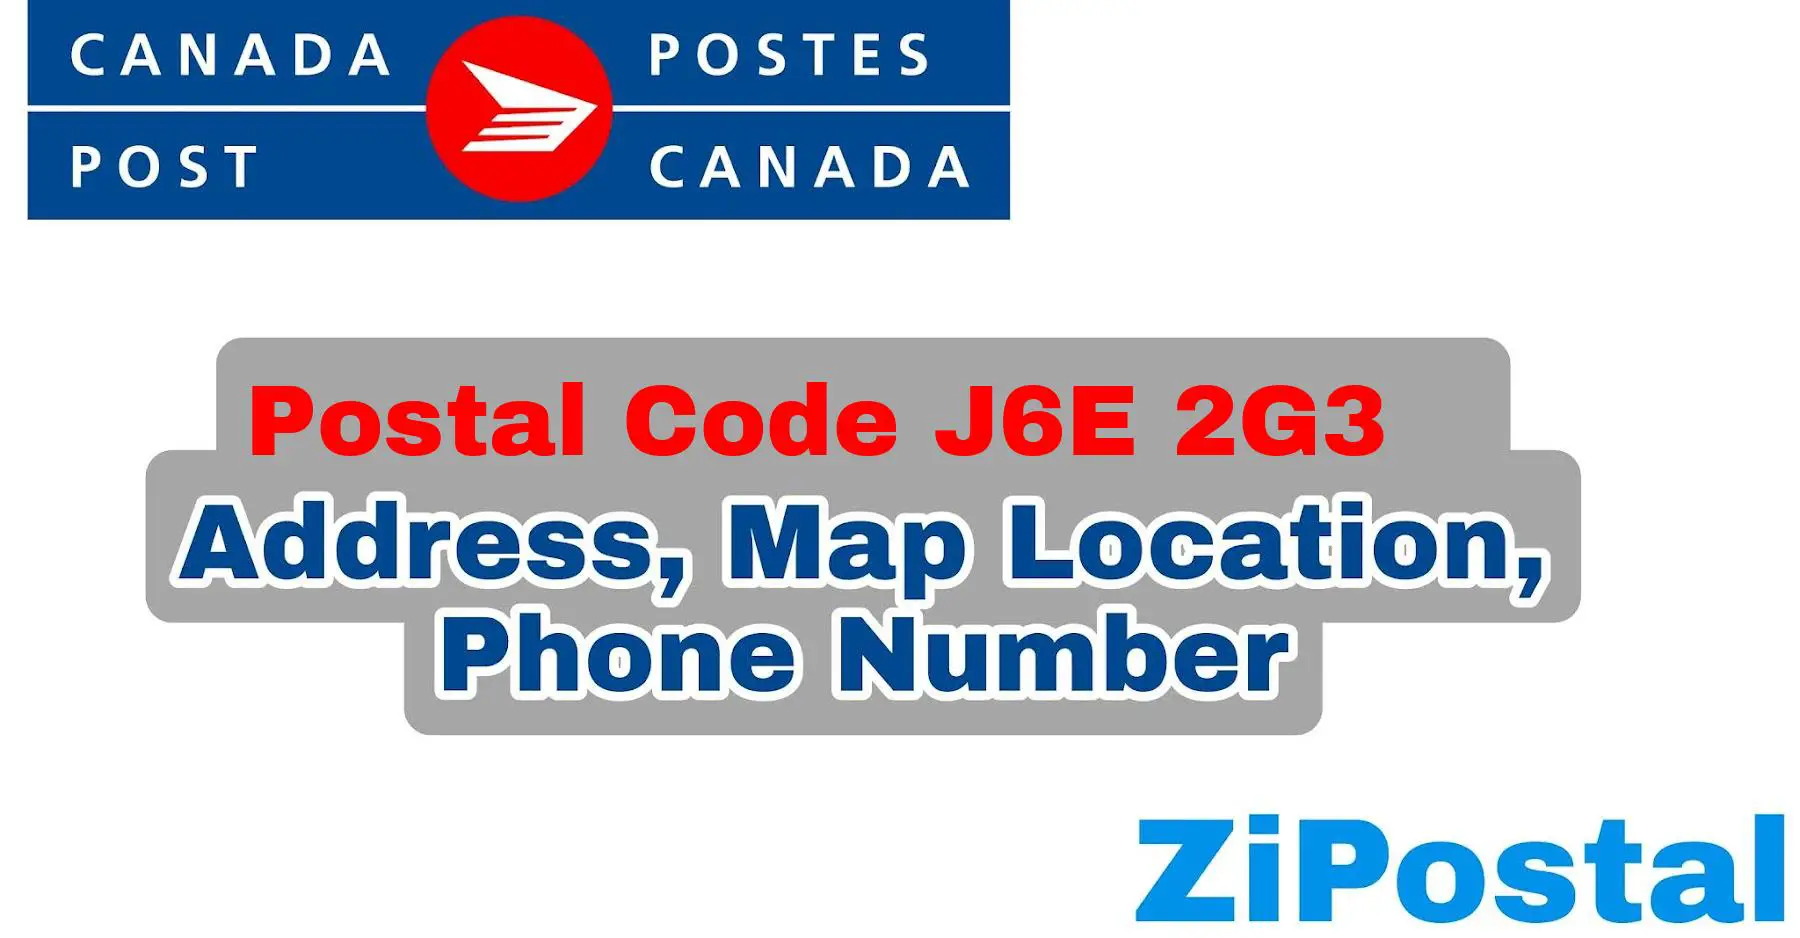 Postal Code J6E 2G3 Address Map Location and Phone Number